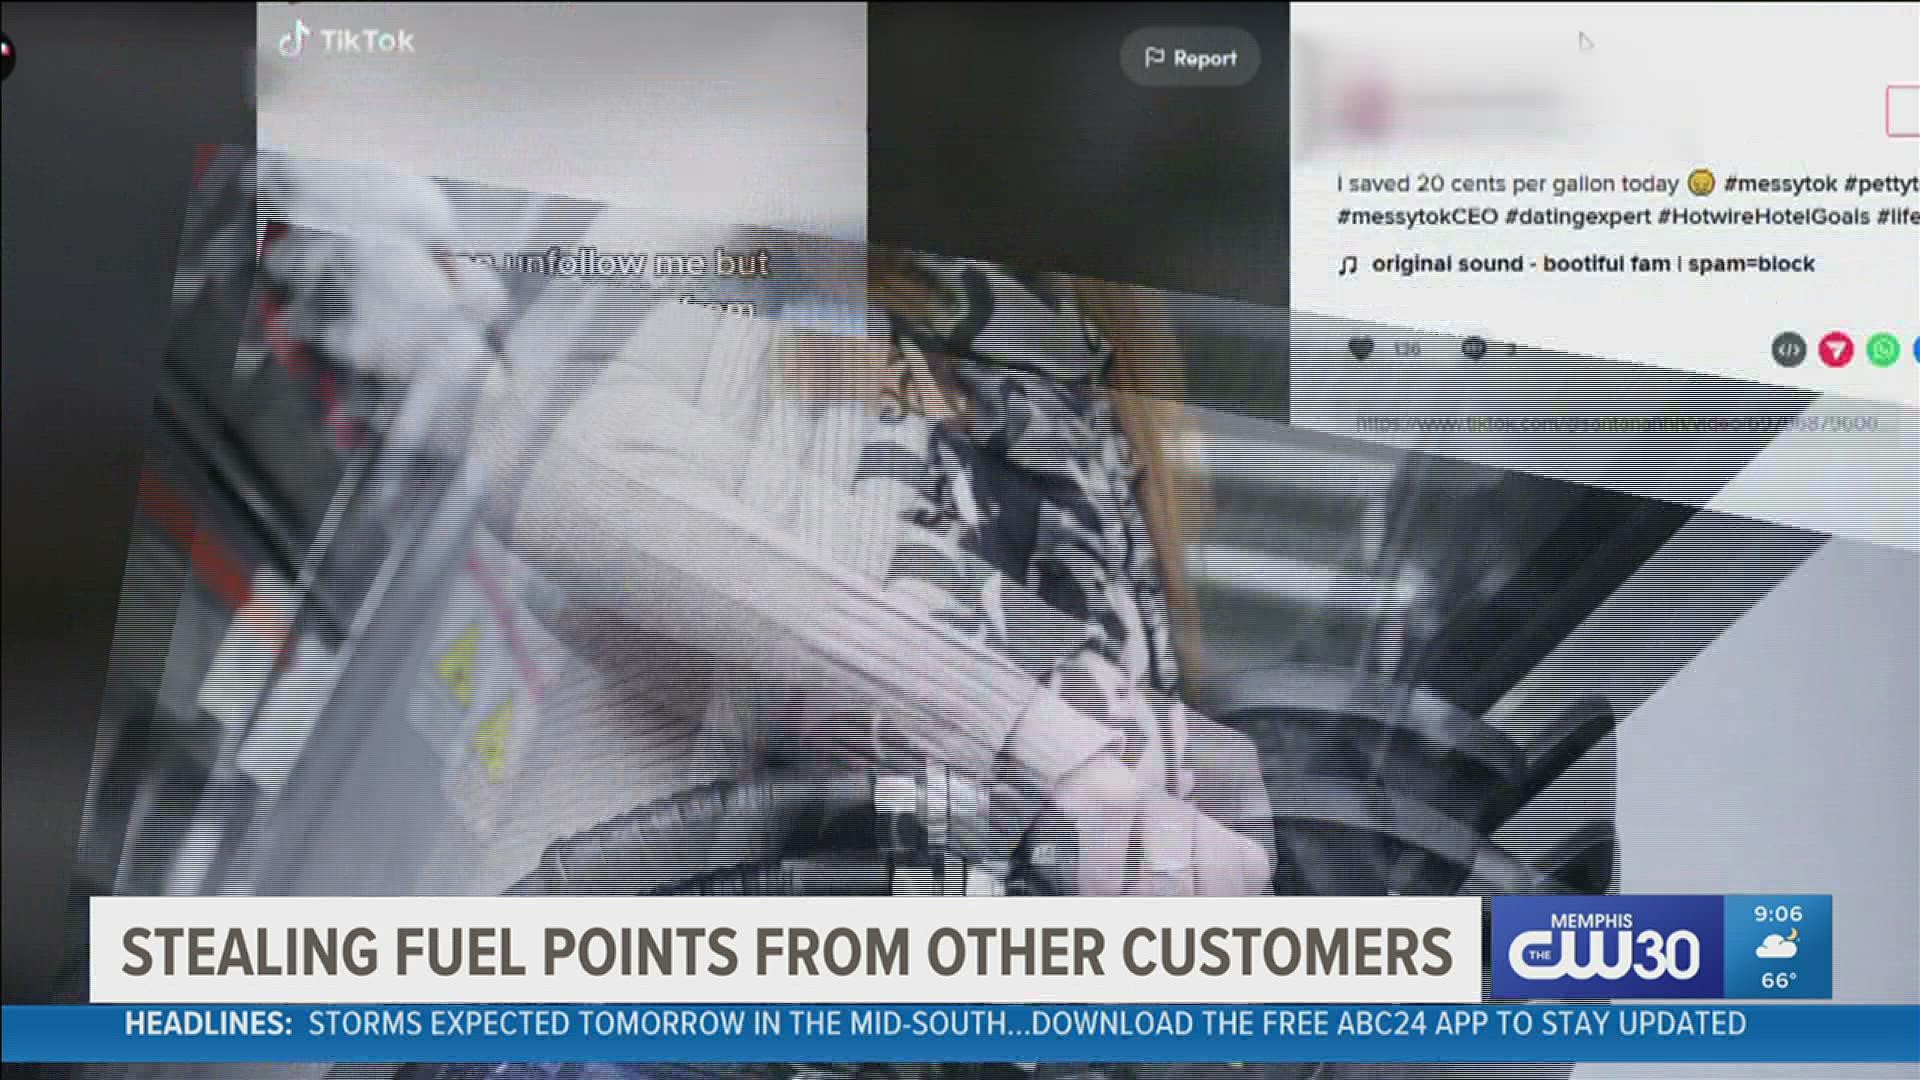 Scoring discounts on gas using fuel points can sure feel good, but one man noticed he wasn't getting the discounts he deserved.